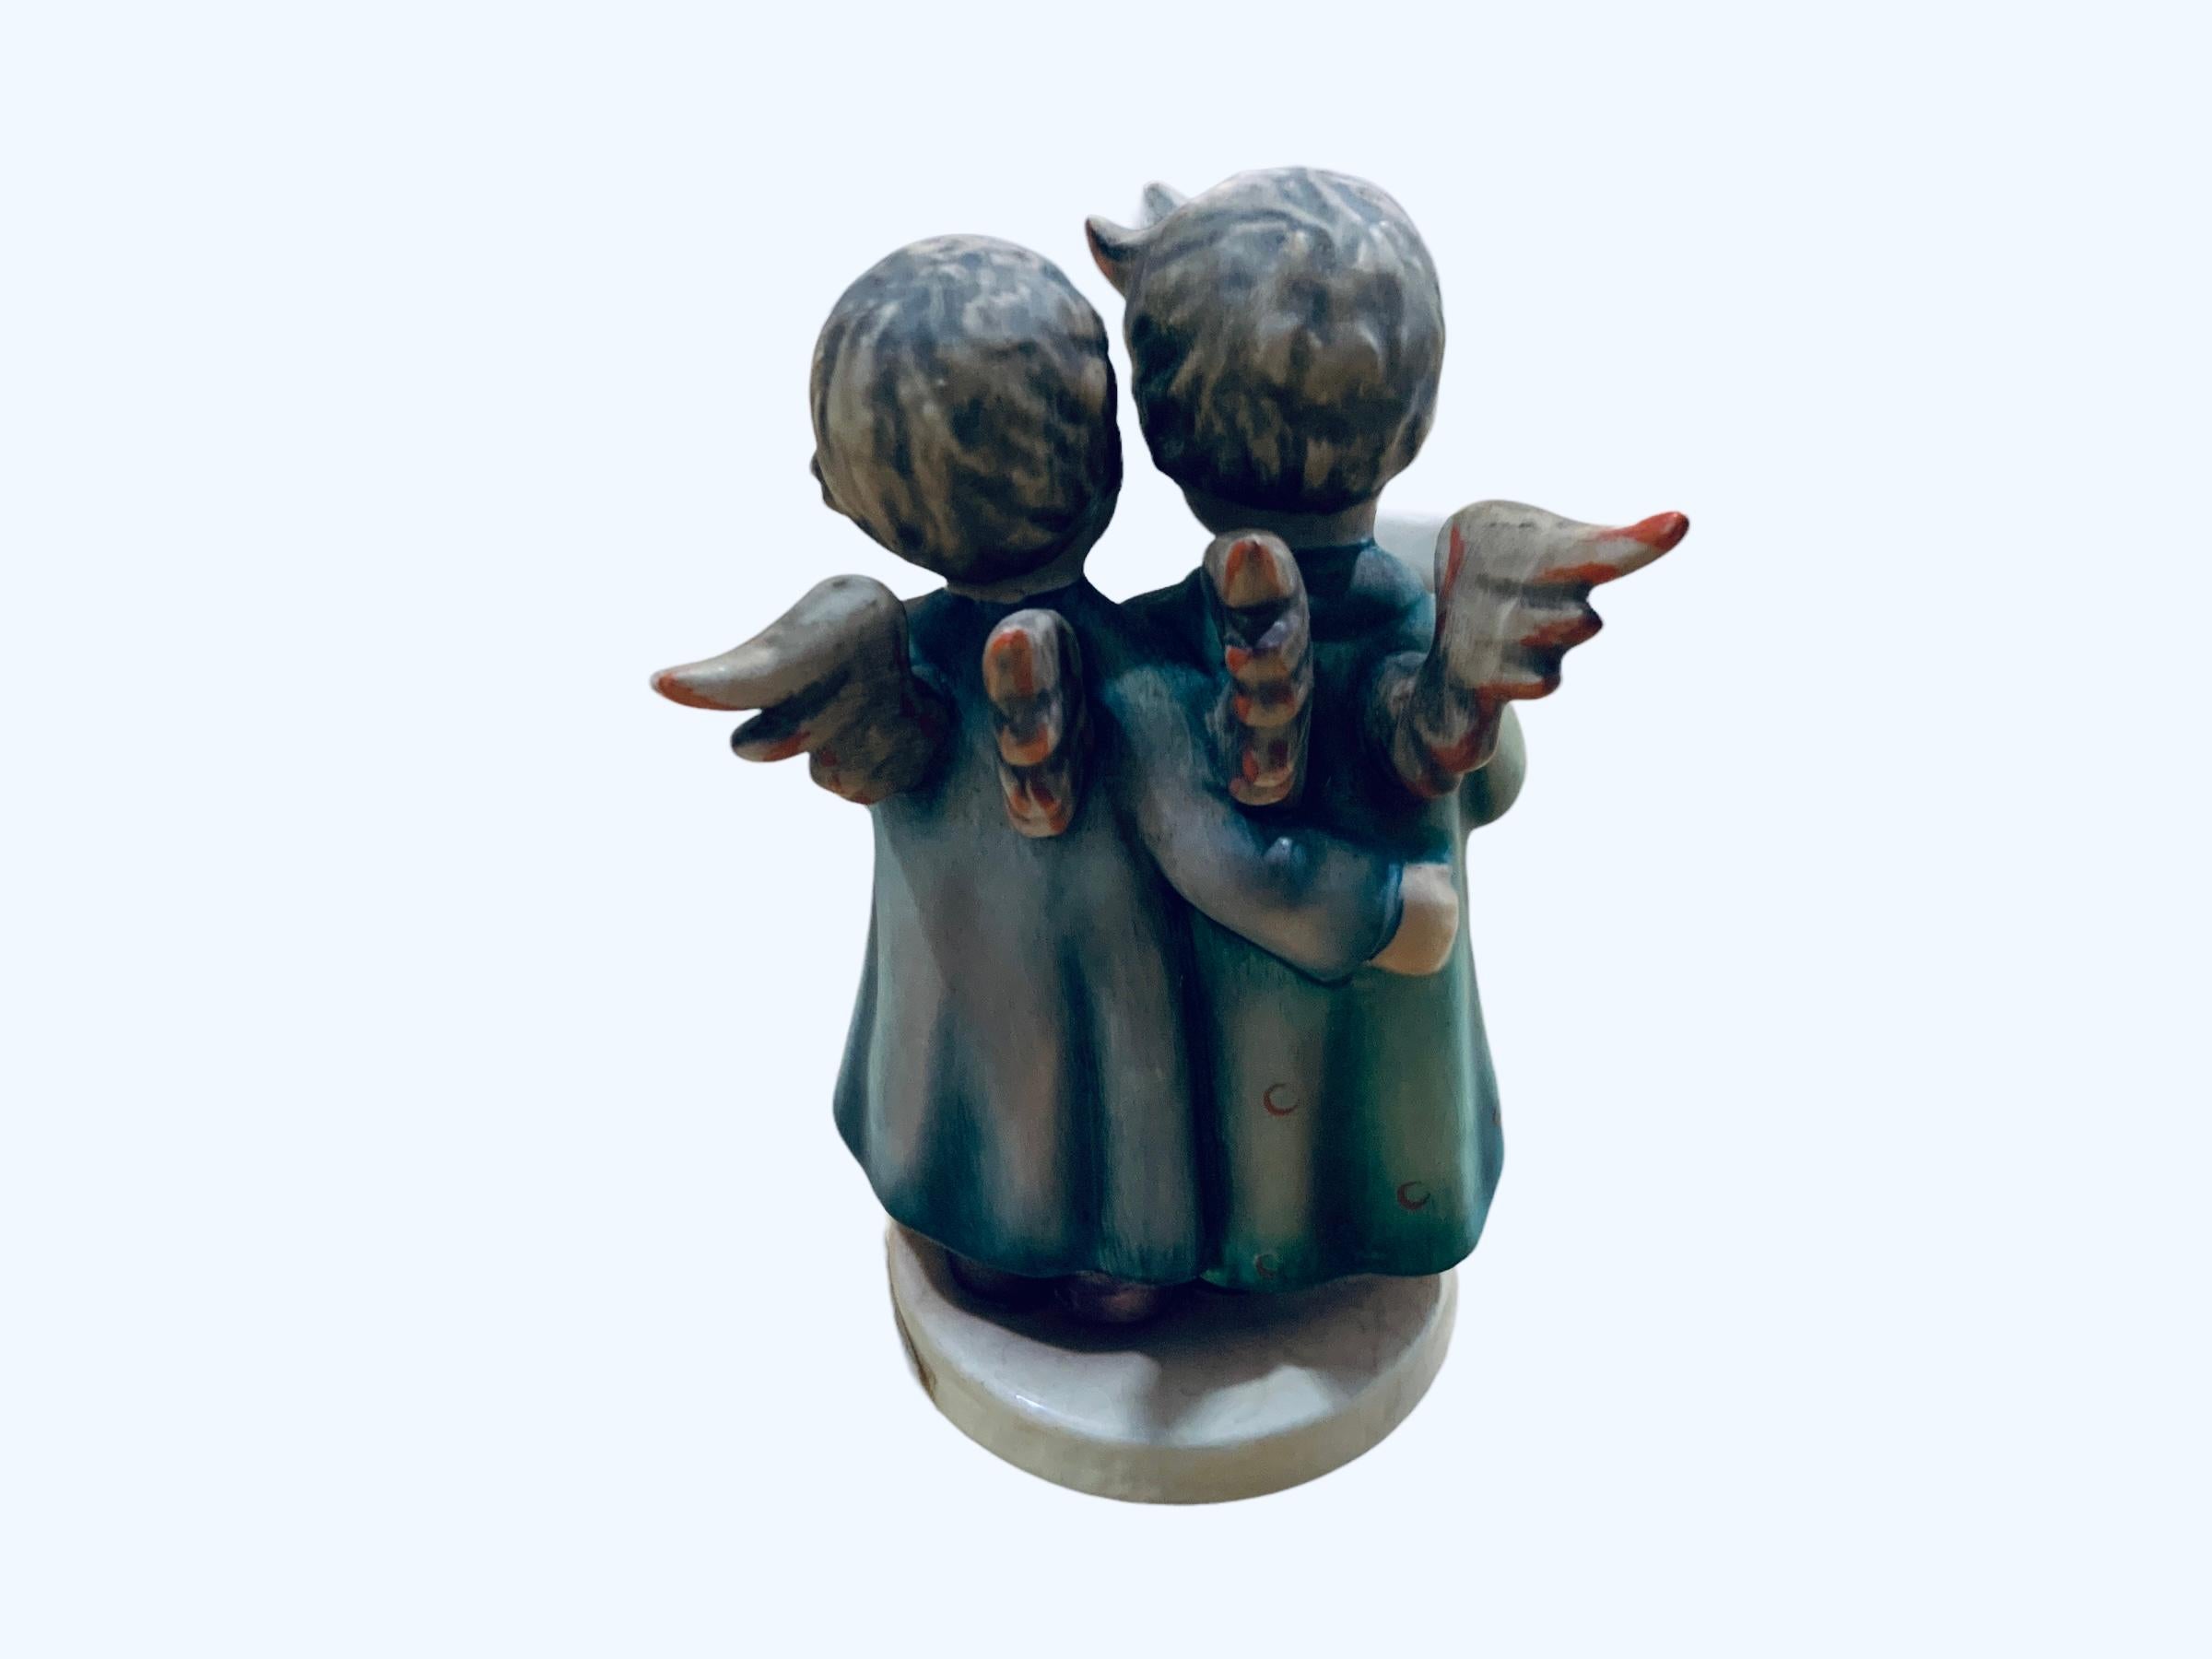 This is a Hummel porcelain group figurines of angels. It’s named “Angel Duet”. Its mark is TMK5 (1970s). The trademark of Goebel company is below the base with the # 261 inscribed.